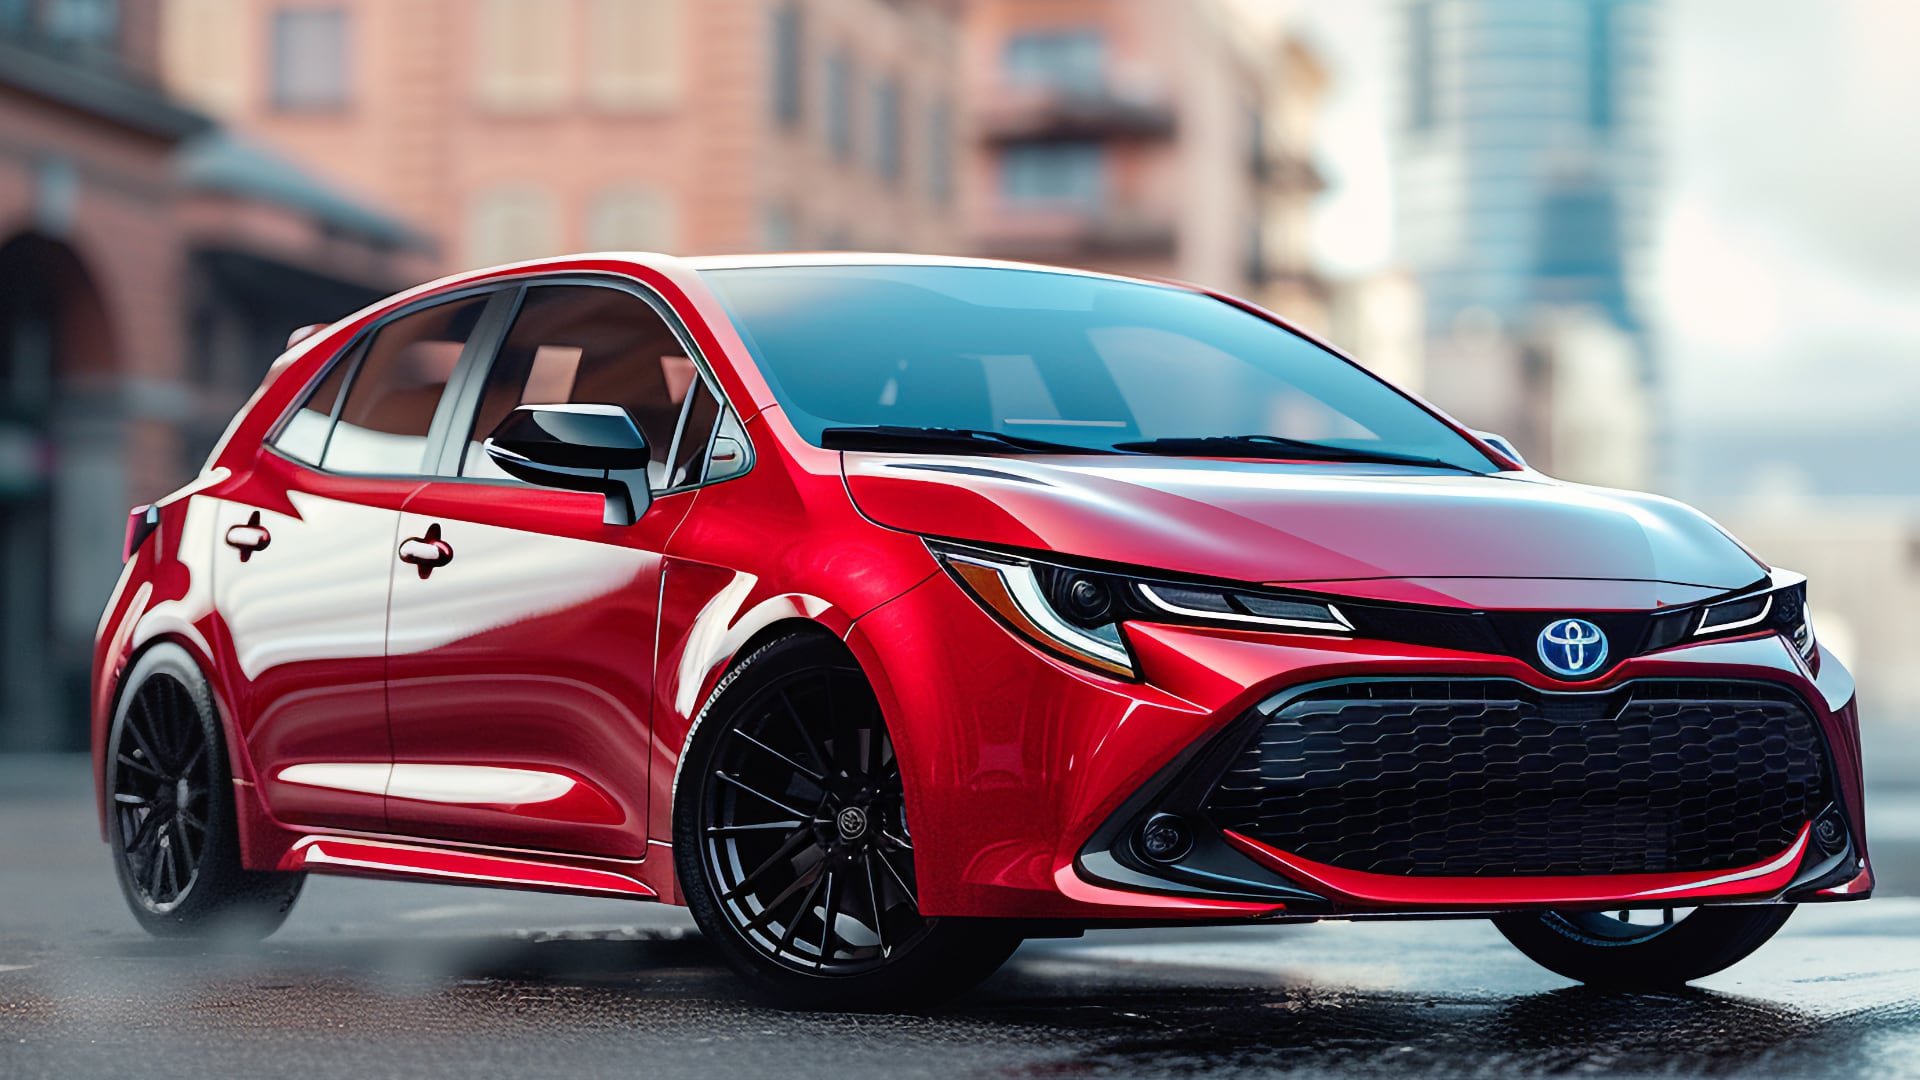 A red 2019 Toyota Corolla parked on a city street, safe from the years to avoid.